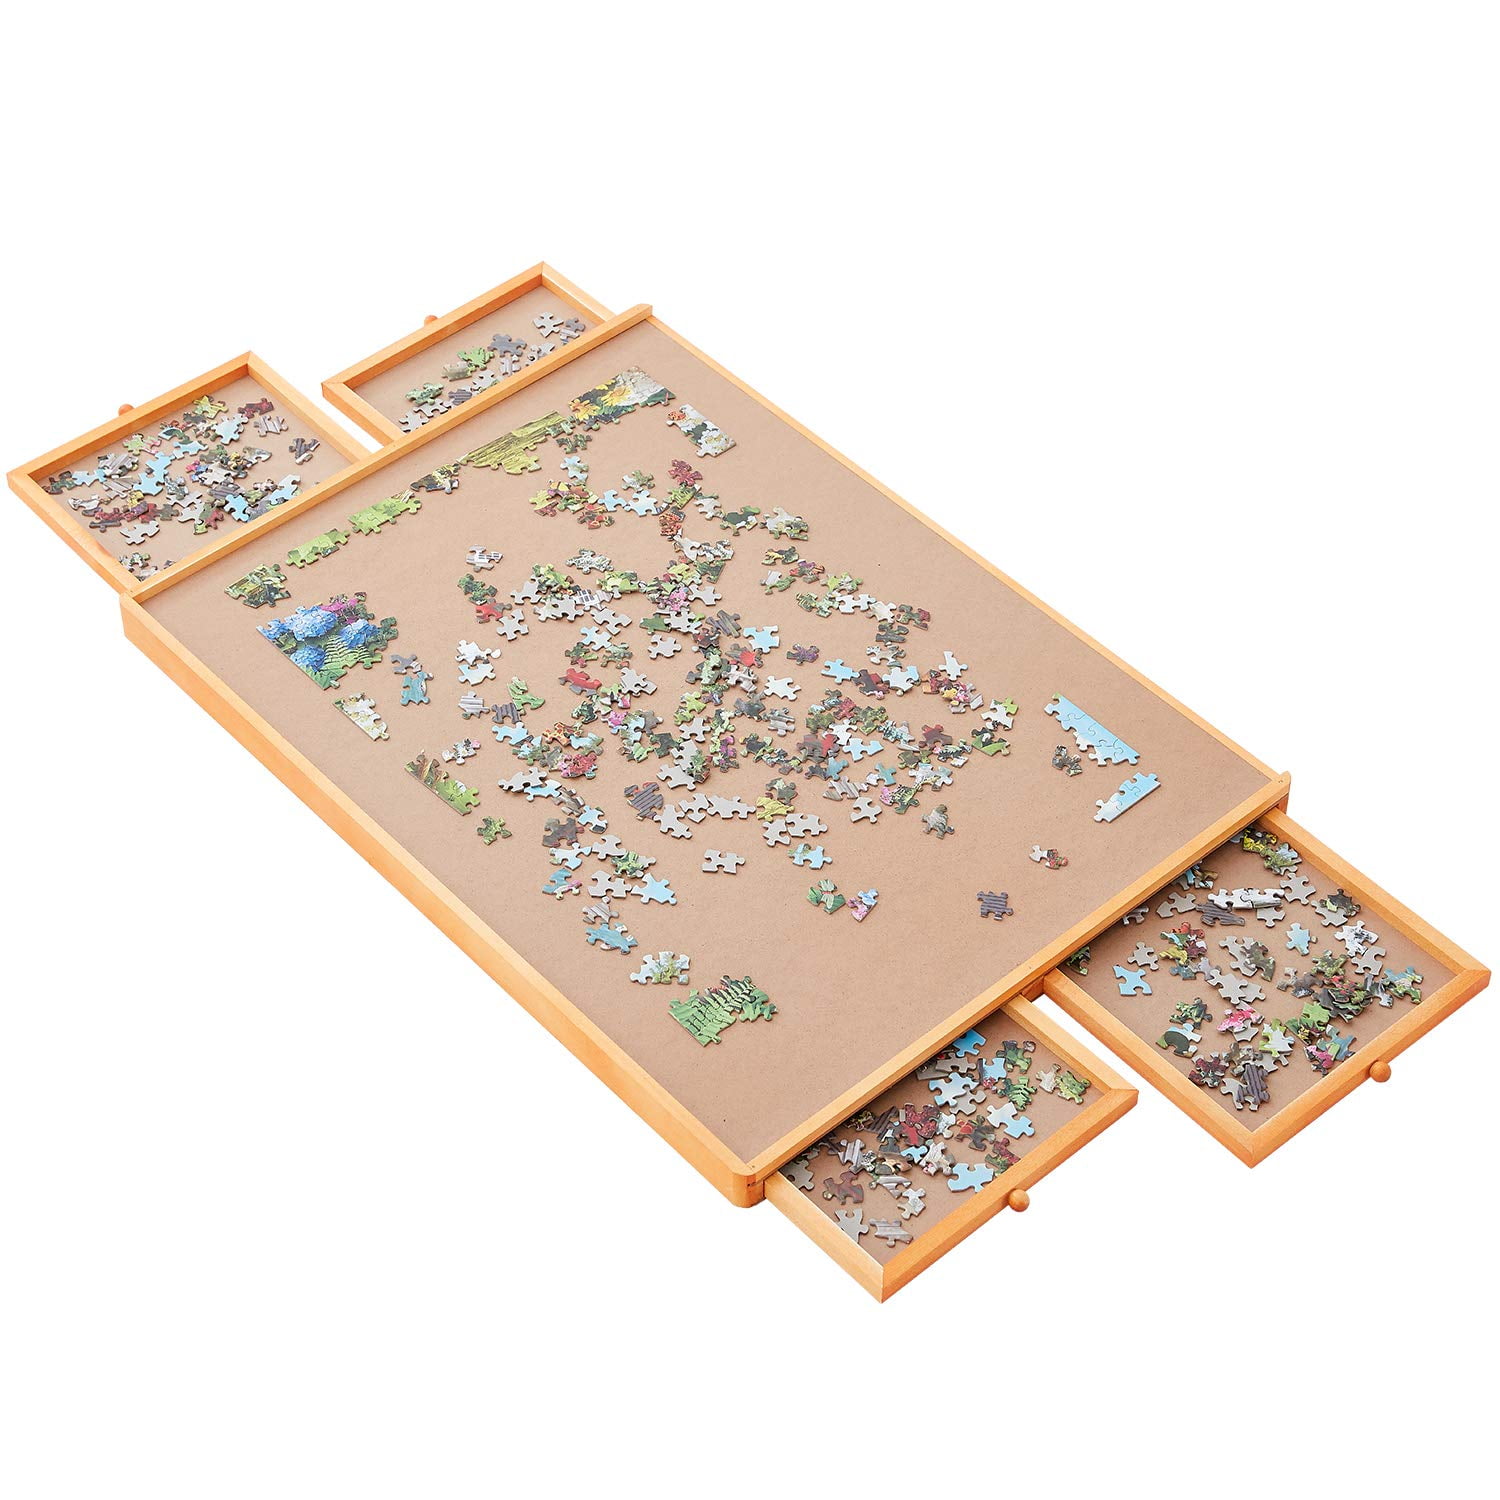 jigsaw puzzle table storage folding table 1000 1500 pcs mat board plate 34"x 26" 